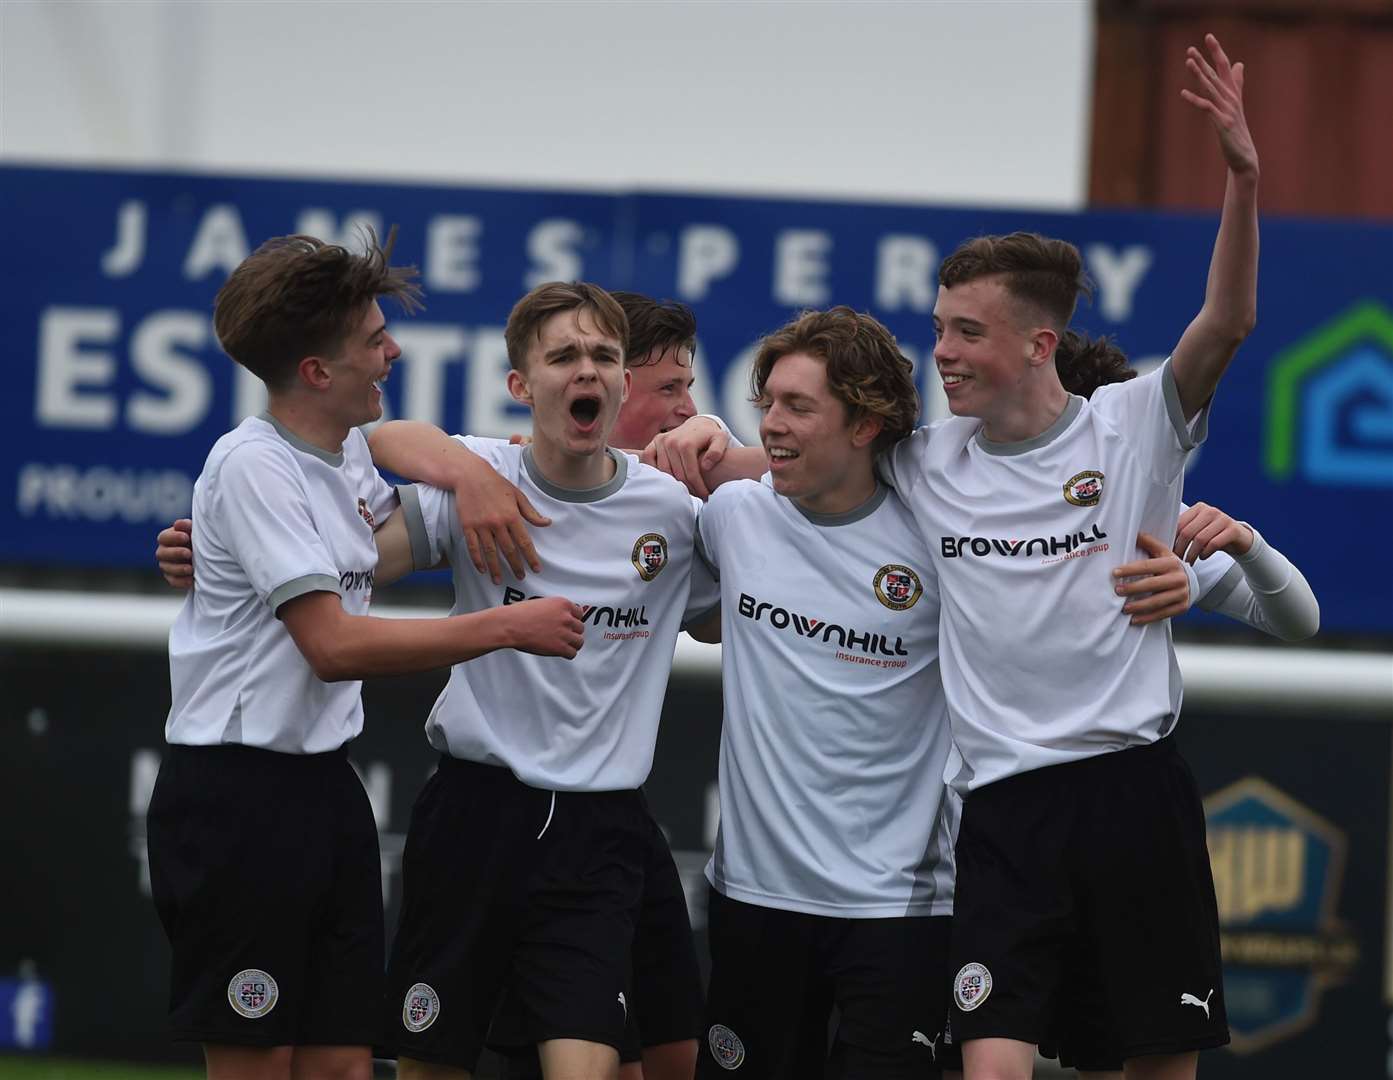 Bromley under-15s celebrate after Ben Mills scored their fourth goal on Sunday. Picture: PSP Images